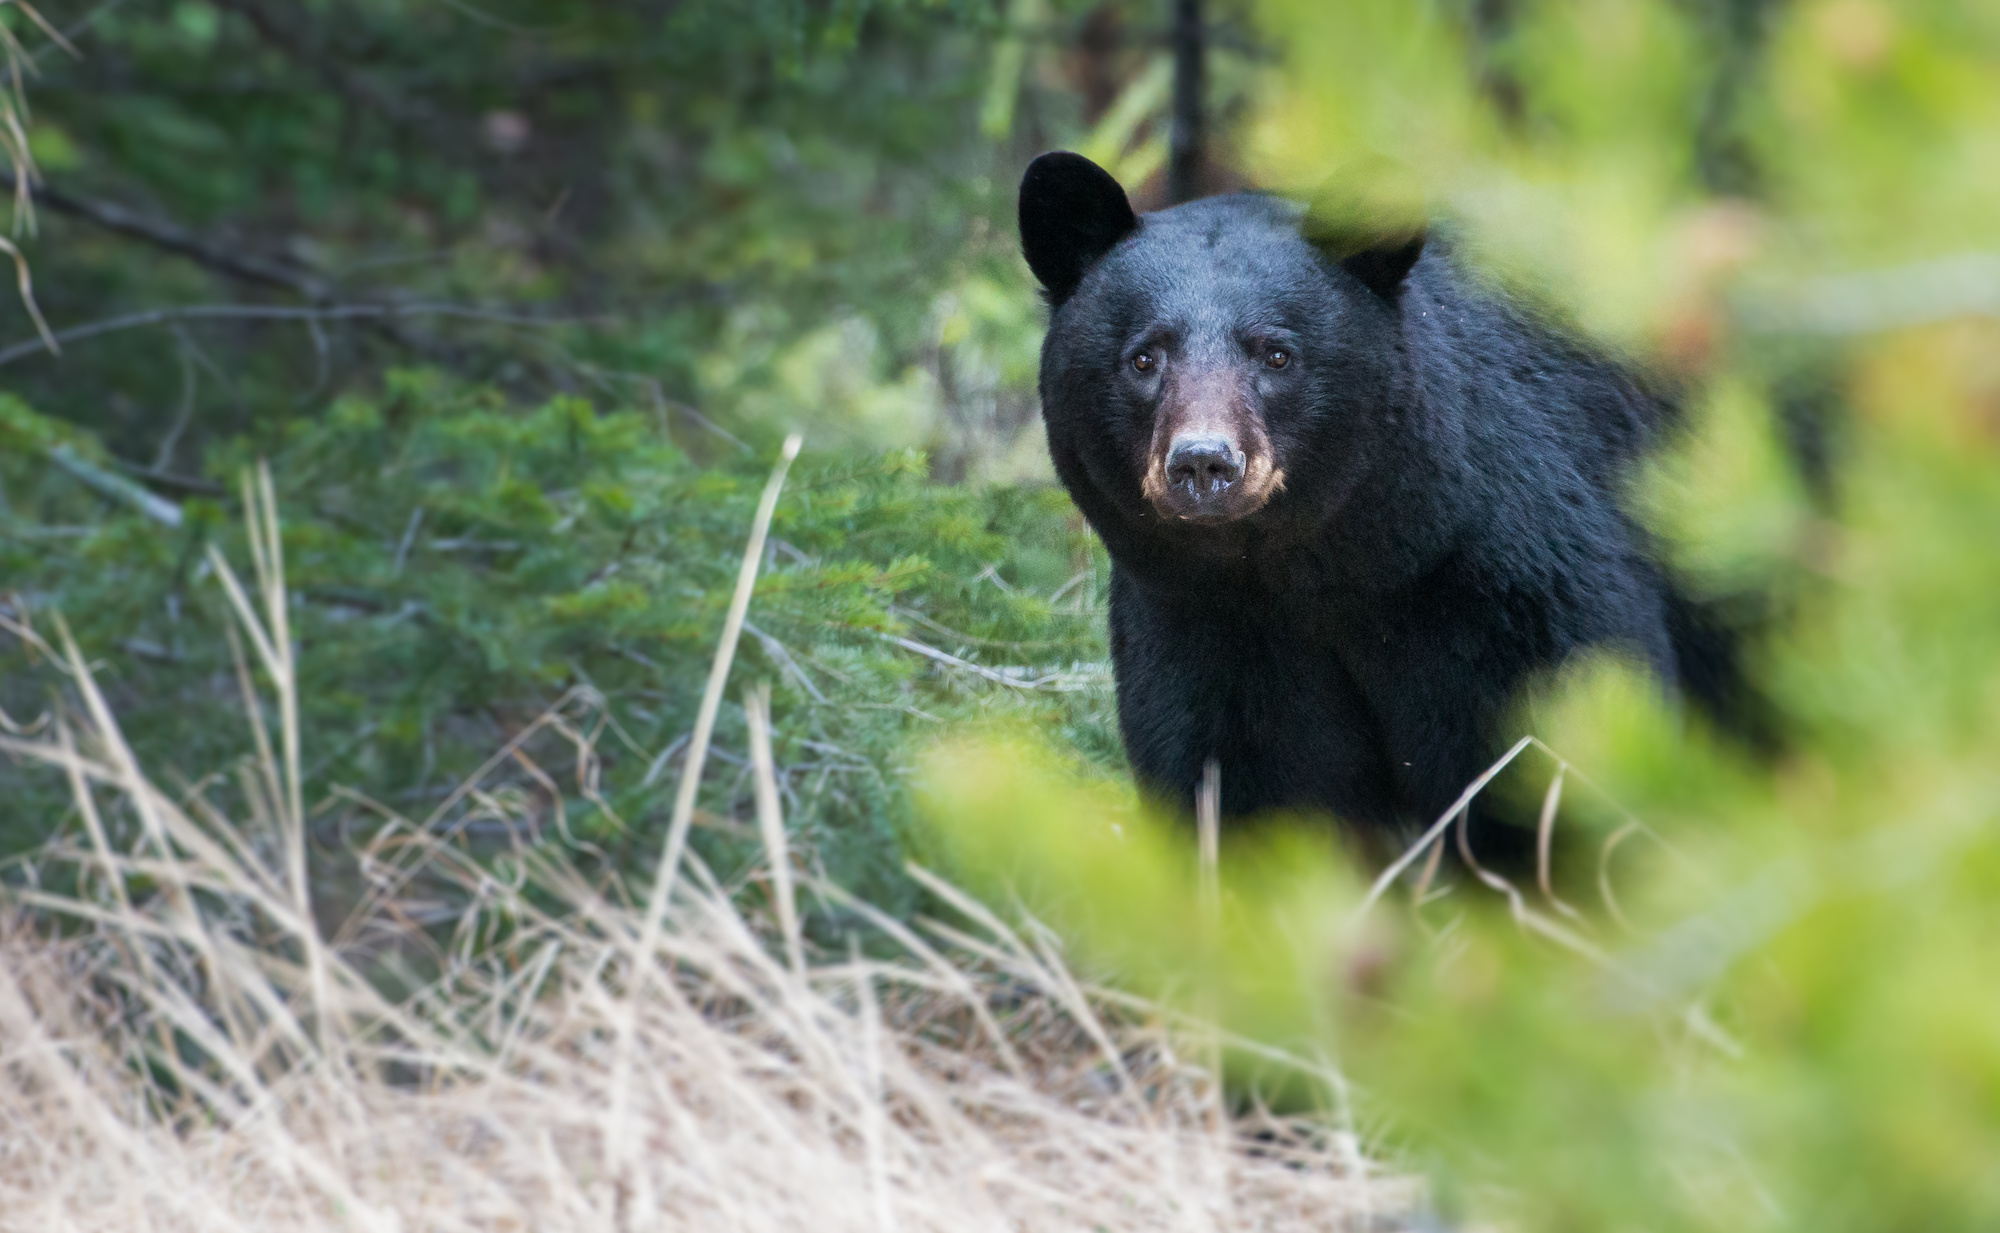 A Woman Encouraged Her Son to Poach a Black Bear Cub. He Poached Two